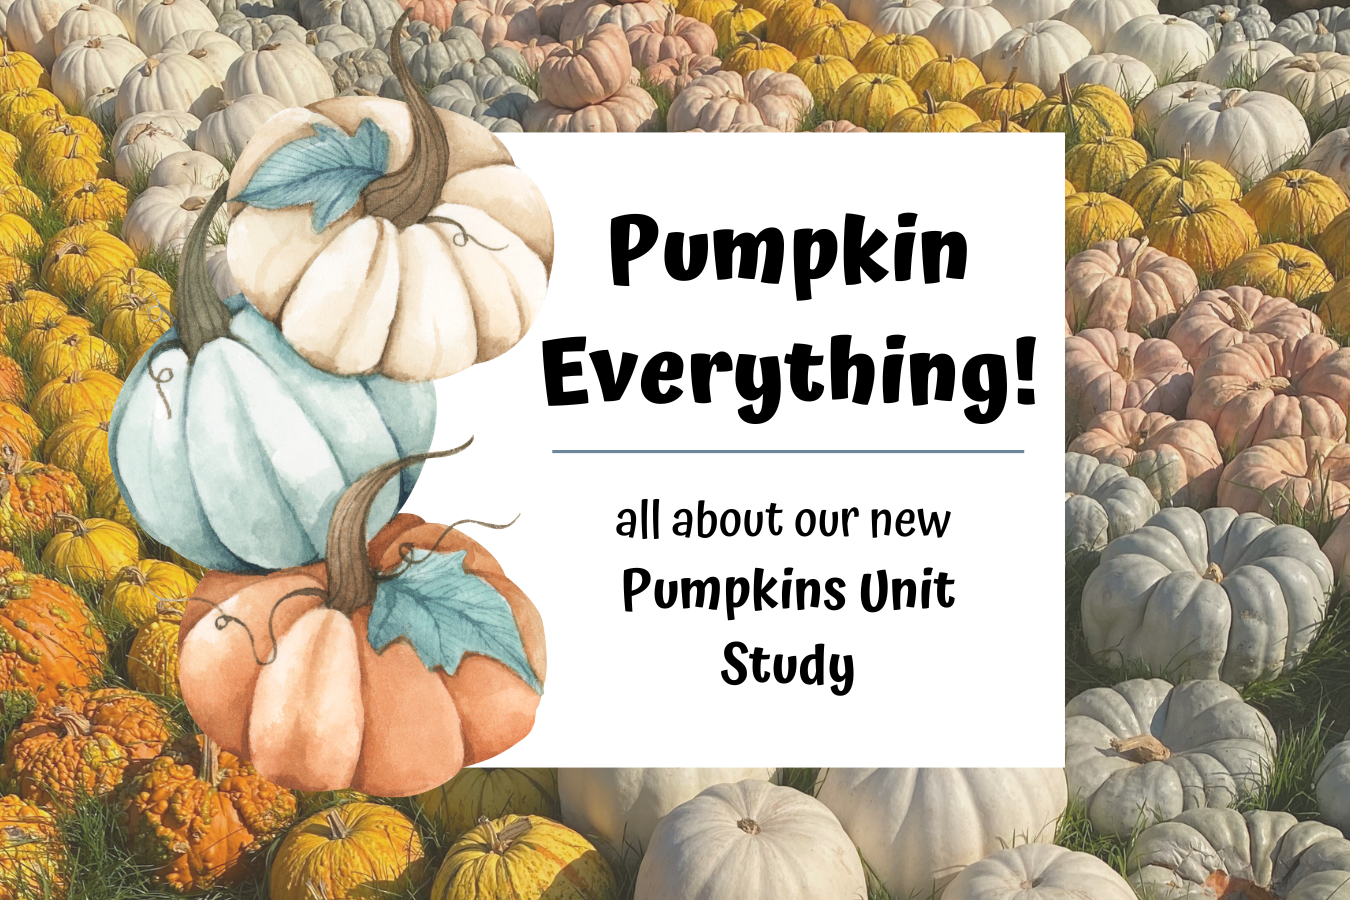 Blog feature image: Pumpkin everything about our pumpkins unit study.